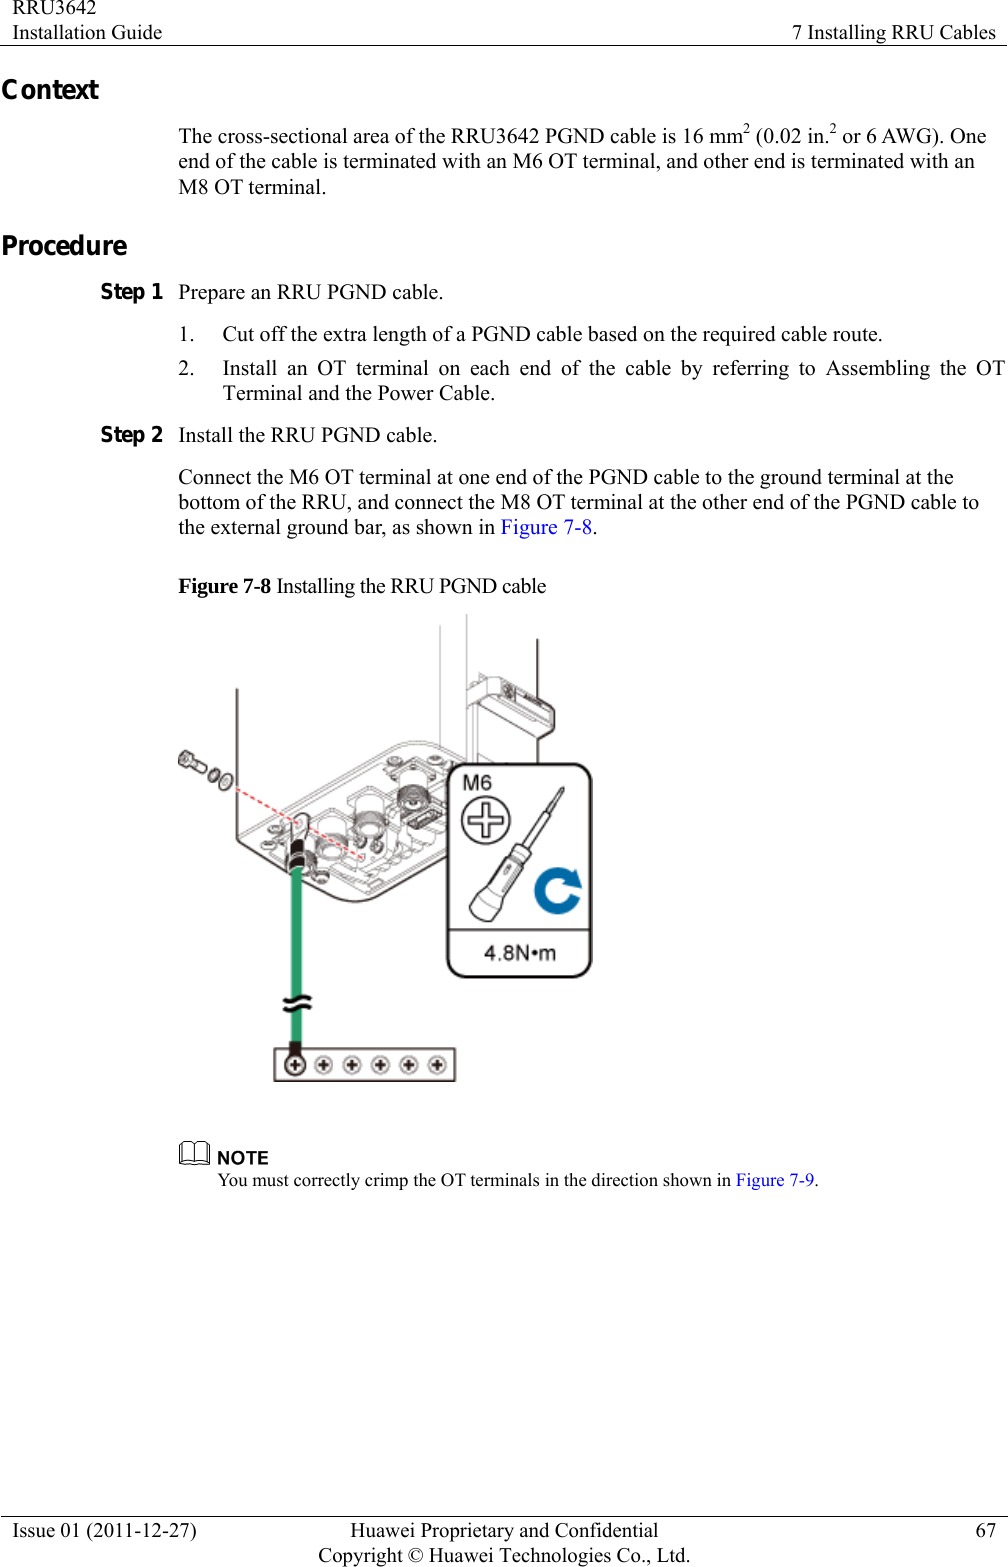 RRU3642 Installation Guide  7 Installing RRU Cables Issue 01 (2011-12-27)  Huawei Proprietary and Confidential         Copyright © Huawei Technologies Co., Ltd.67 Context The cross-sectional area of the RRU3642 PGND cable is 16 mm2 (0.02 in.2 or 6 AWG). One end of the cable is terminated with an M6 OT terminal, and other end is terminated with an M8 OT terminal.   Procedure Step 1 Prepare an RRU PGND cable. 1. Cut off the extra length of a PGND cable based on the required cable route. 2. Install an OT terminal on each end of the cable by referring to Assembling the OT Terminal and the Power Cable.   Step 2 Install the RRU PGND cable.   Connect the M6 OT terminal at one end of the PGND cable to the ground terminal at the bottom of the RRU, and connect the M8 OT terminal at the other end of the PGND cable to the external ground bar, as shown in Figure 7-8. Figure 7-8 Installing the RRU PGND cable    You must correctly crimp the OT terminals in the direction shown in Figure 7-9.  